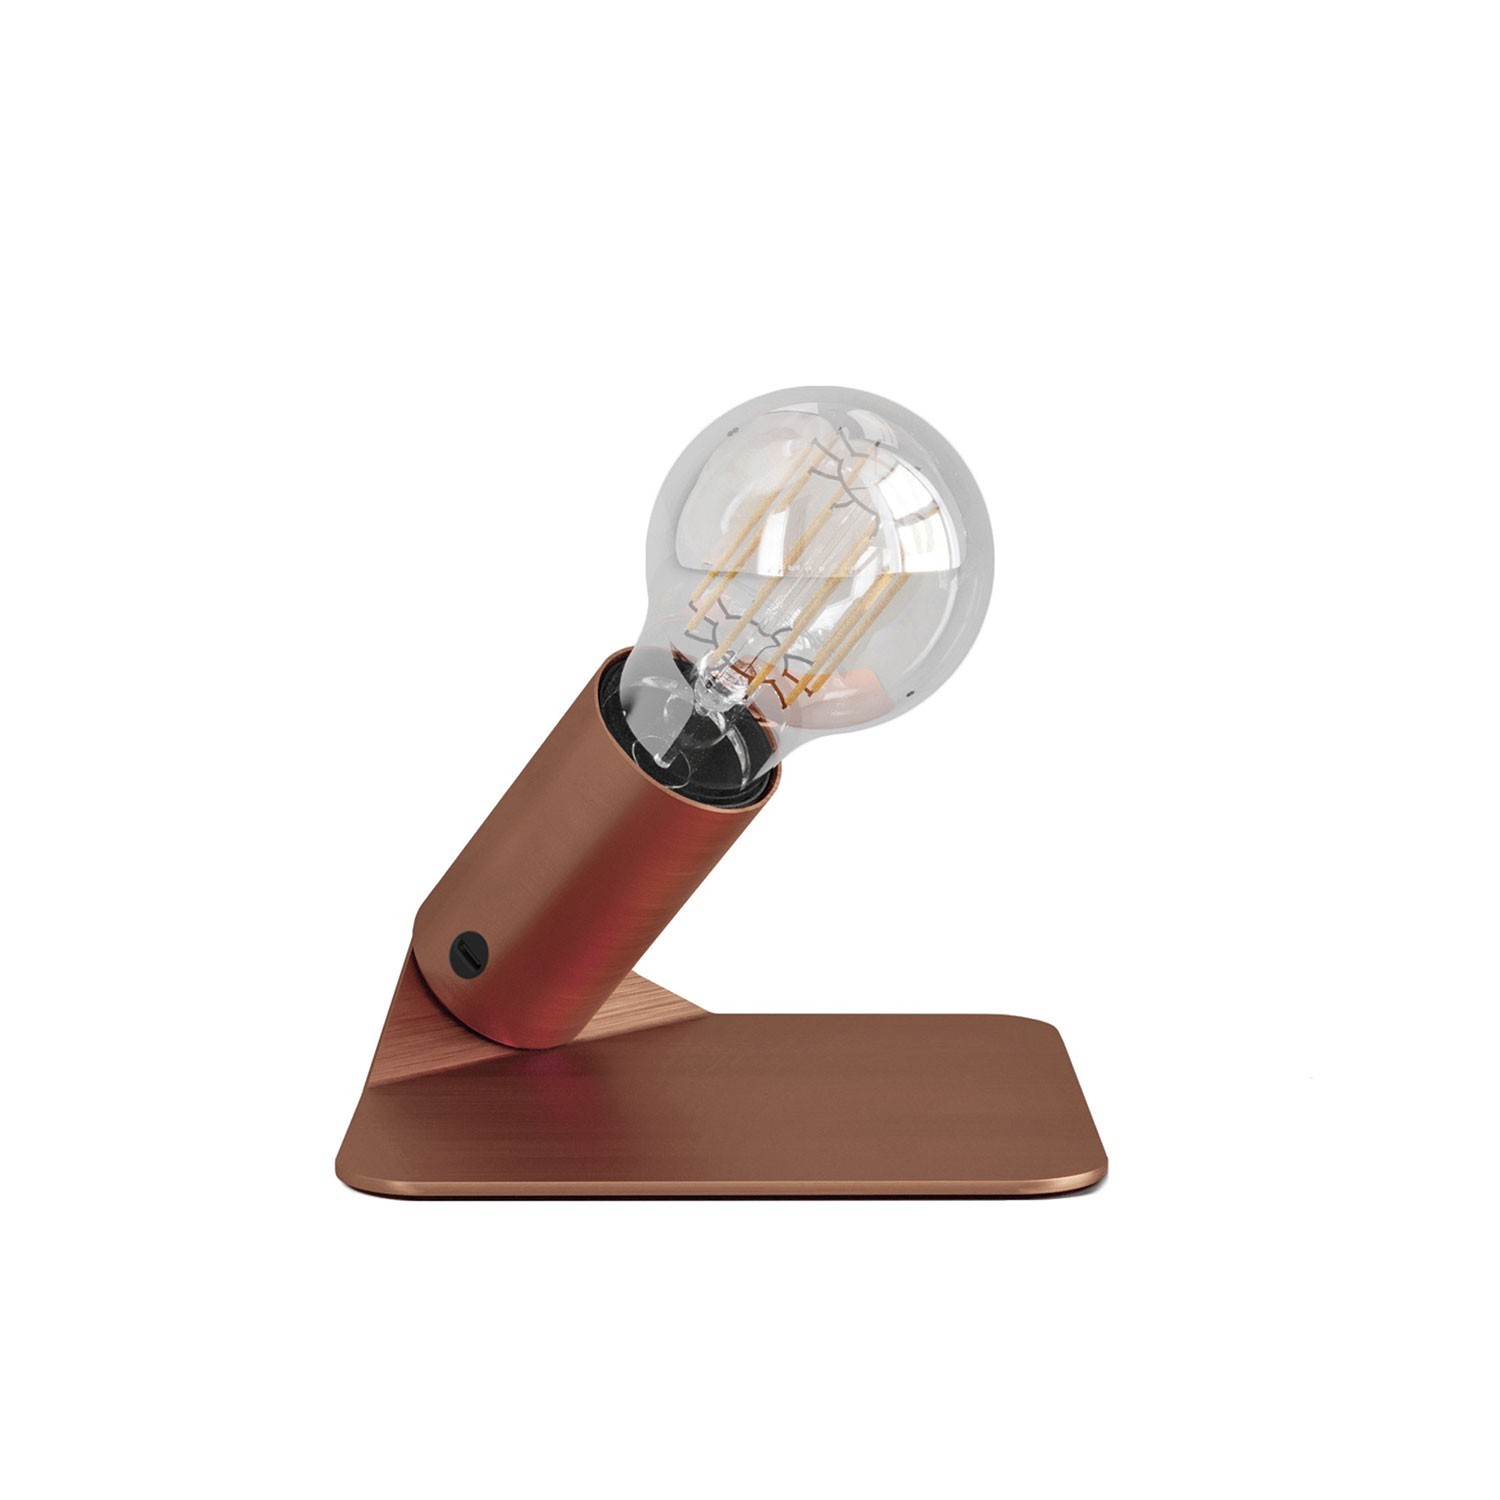 SI! 5V Table lamp with A60 light bulb and metallic base